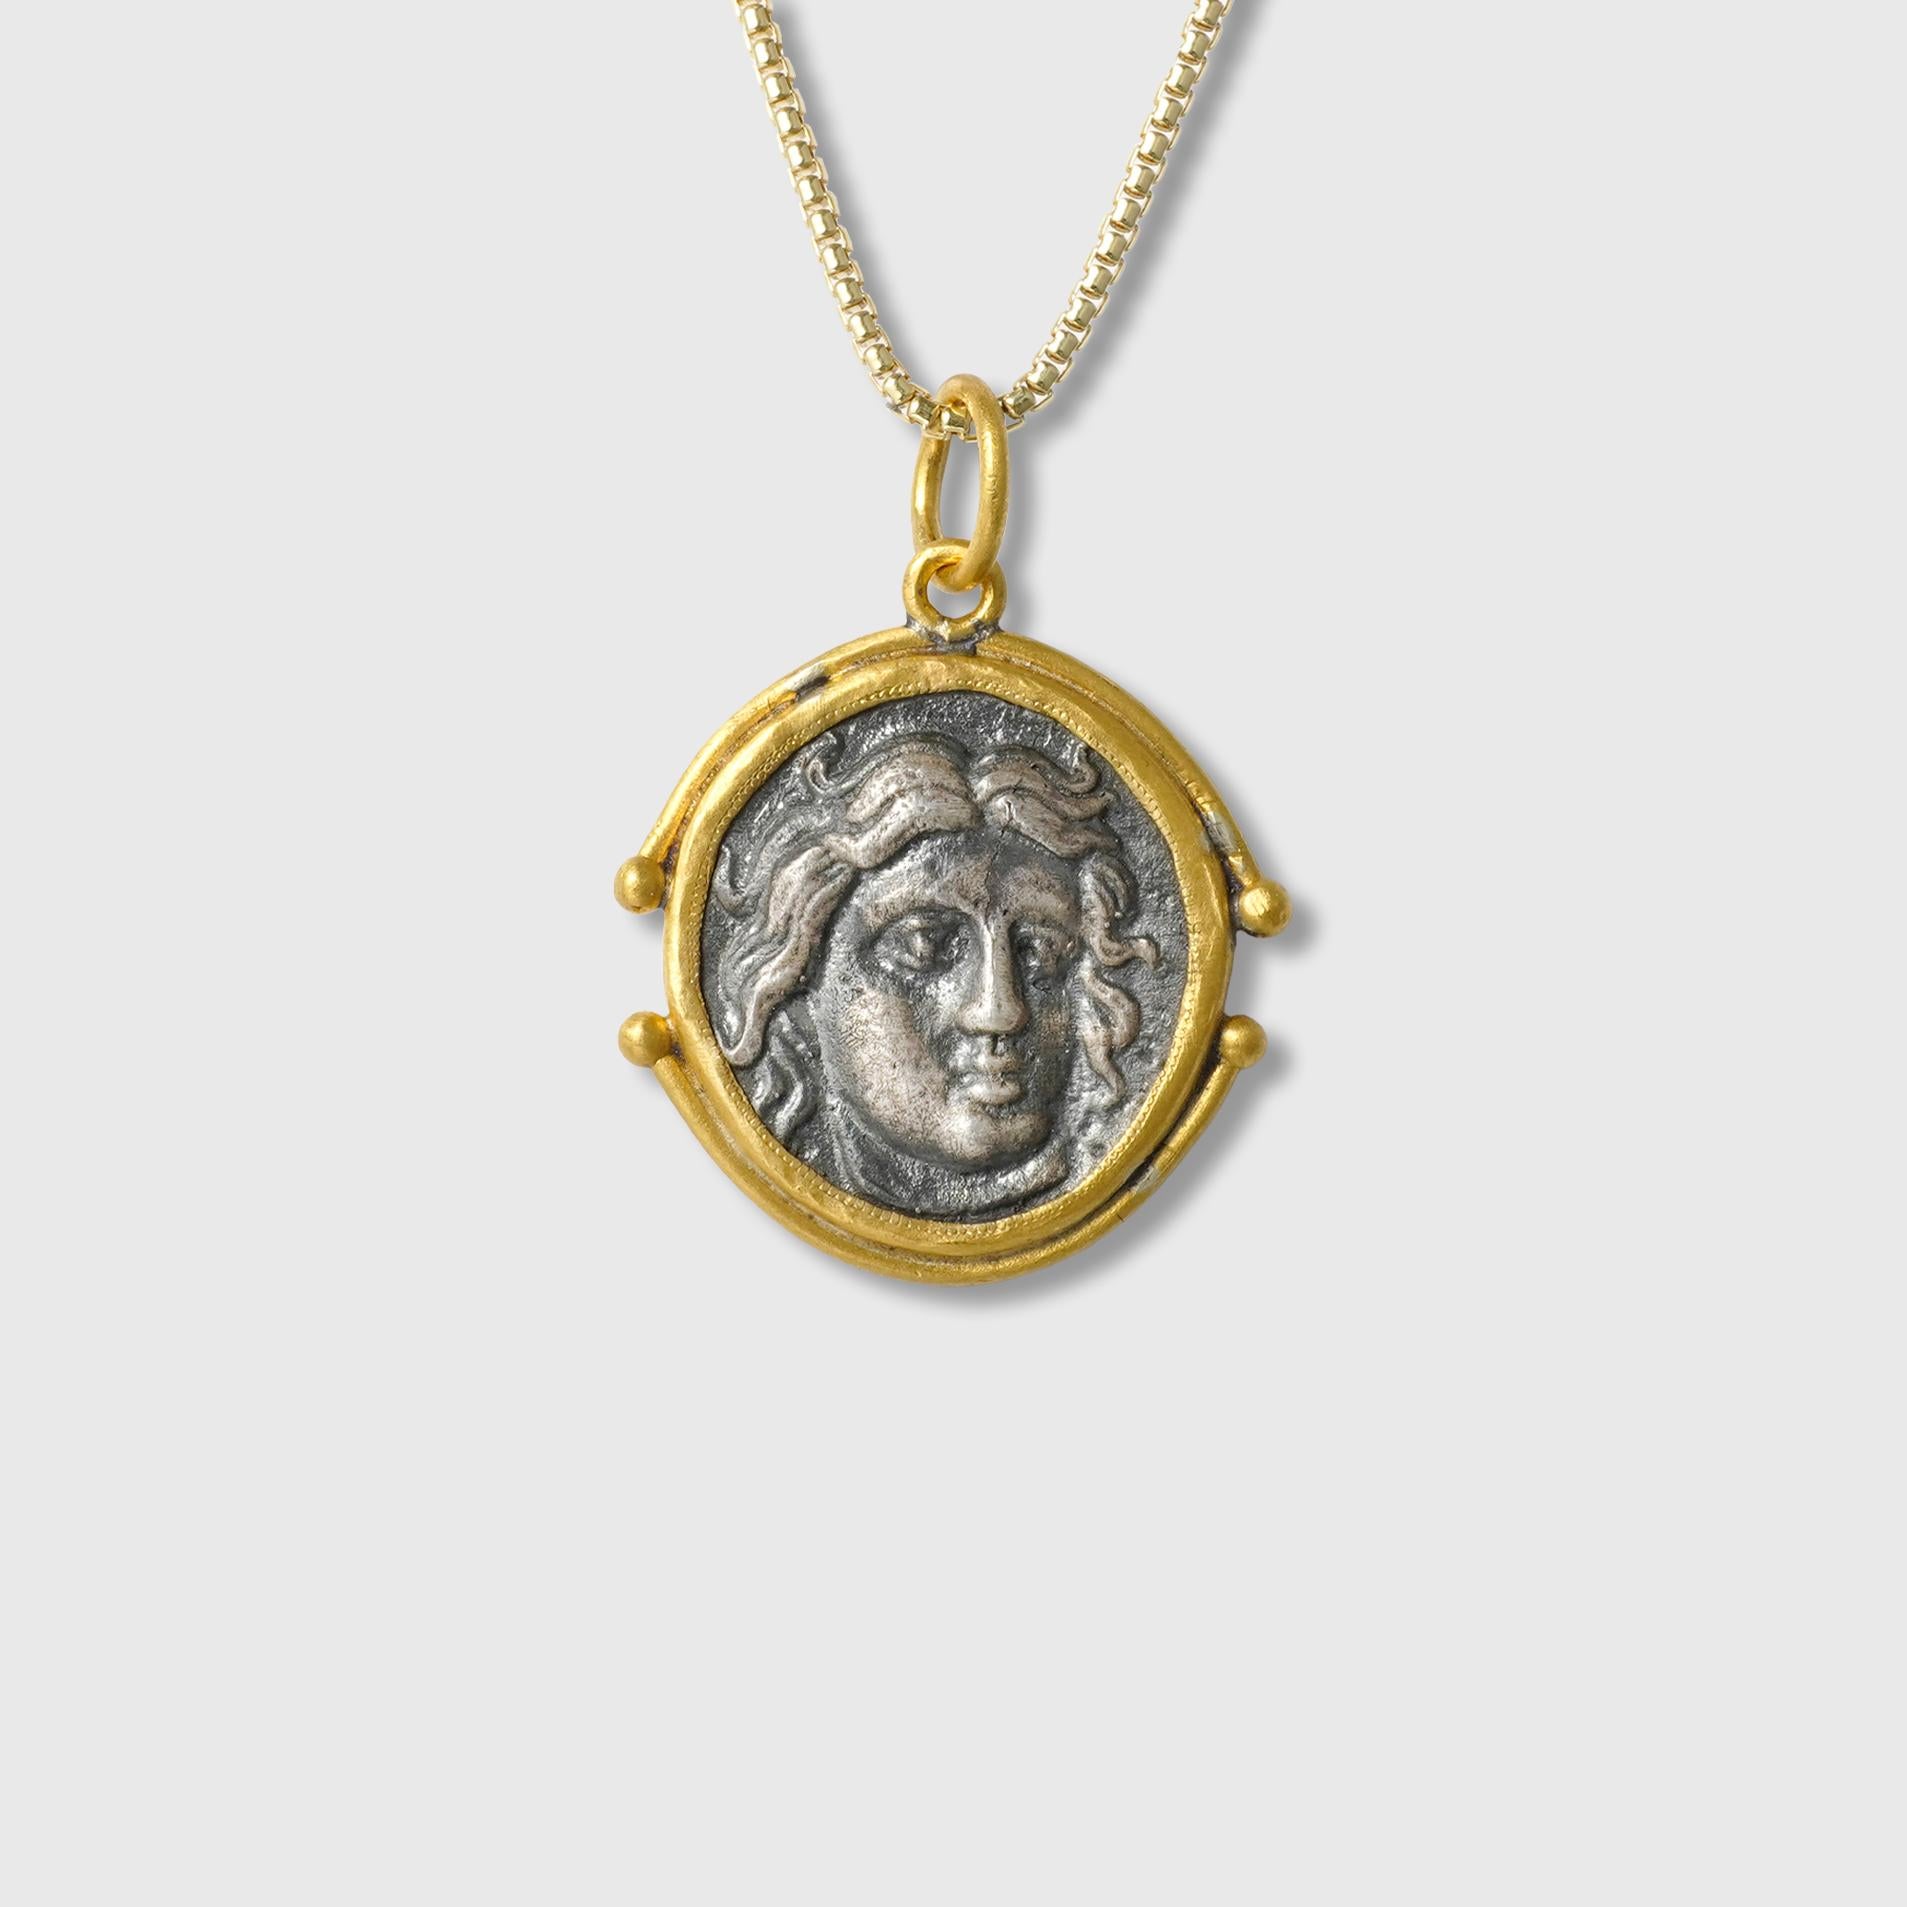 24kt Gold and Silver Charm Pendant of Apollo, God of Fine Arts & Music - Back Side Shows Apollo's Rose.

Apollo has been recognized as a god of archery, music and dance, truth and prophecy, healing and diseases, the Sun and light, poetry, and more.